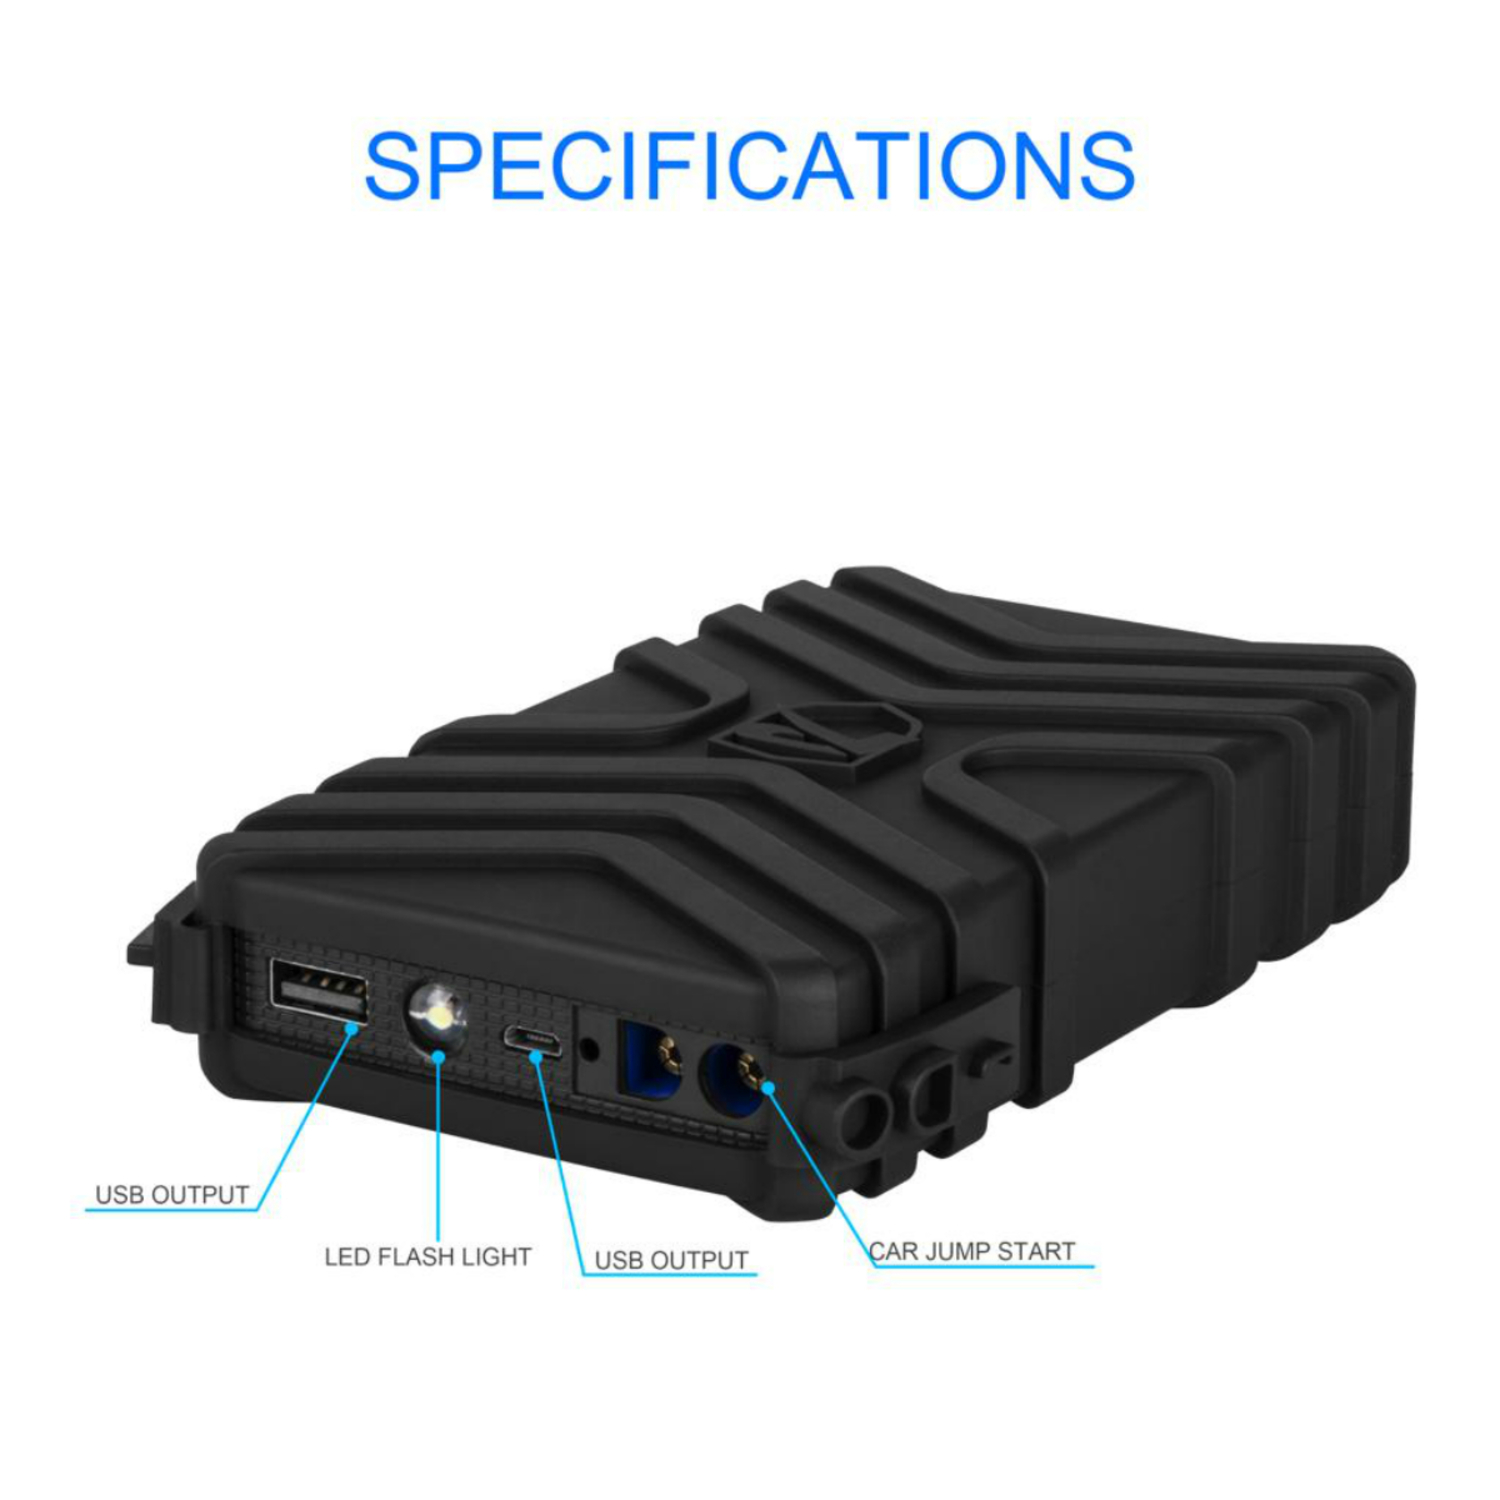 10,000 mAH Rugged Waterproof Lithium Ion Jump Starter And Portable Charger